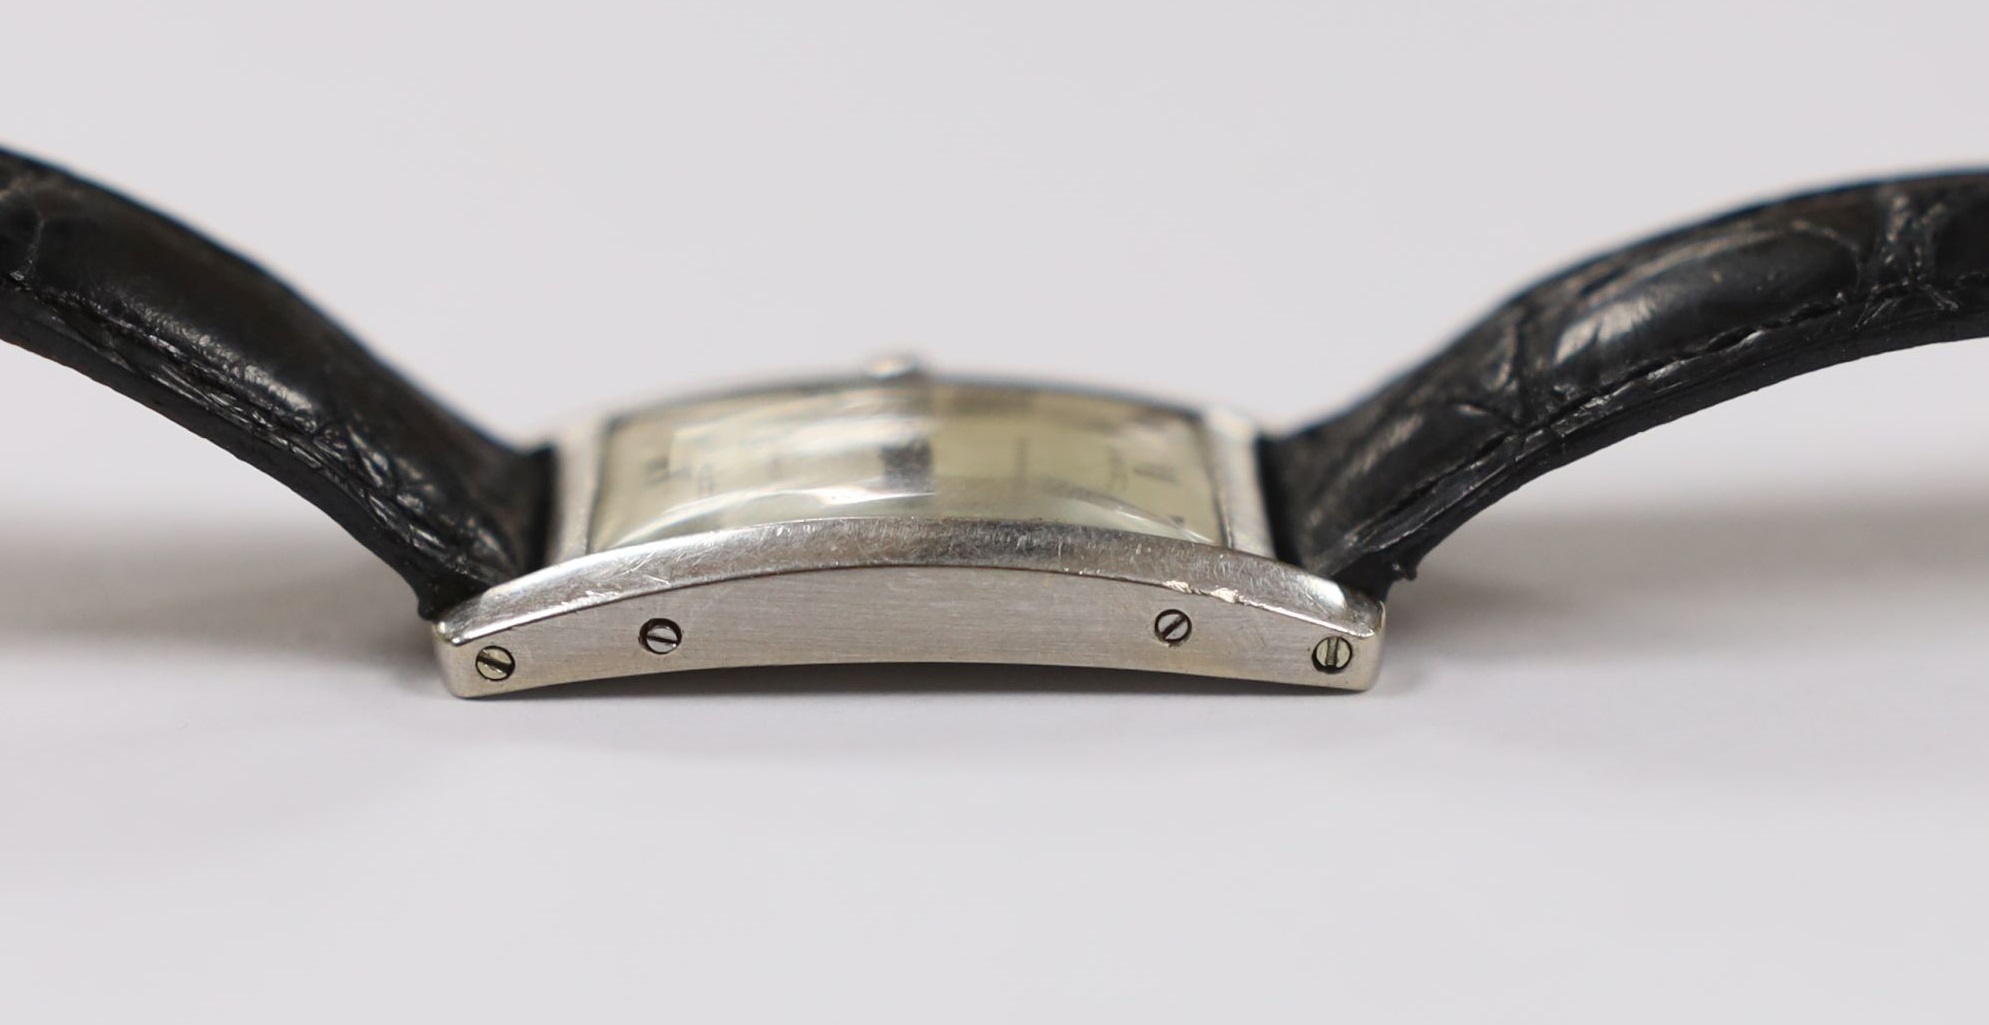 A 1920's 18ct white gold Cartier Tank Cintree (7 lignes model) manual wind wrist watch, with later 1970's movement